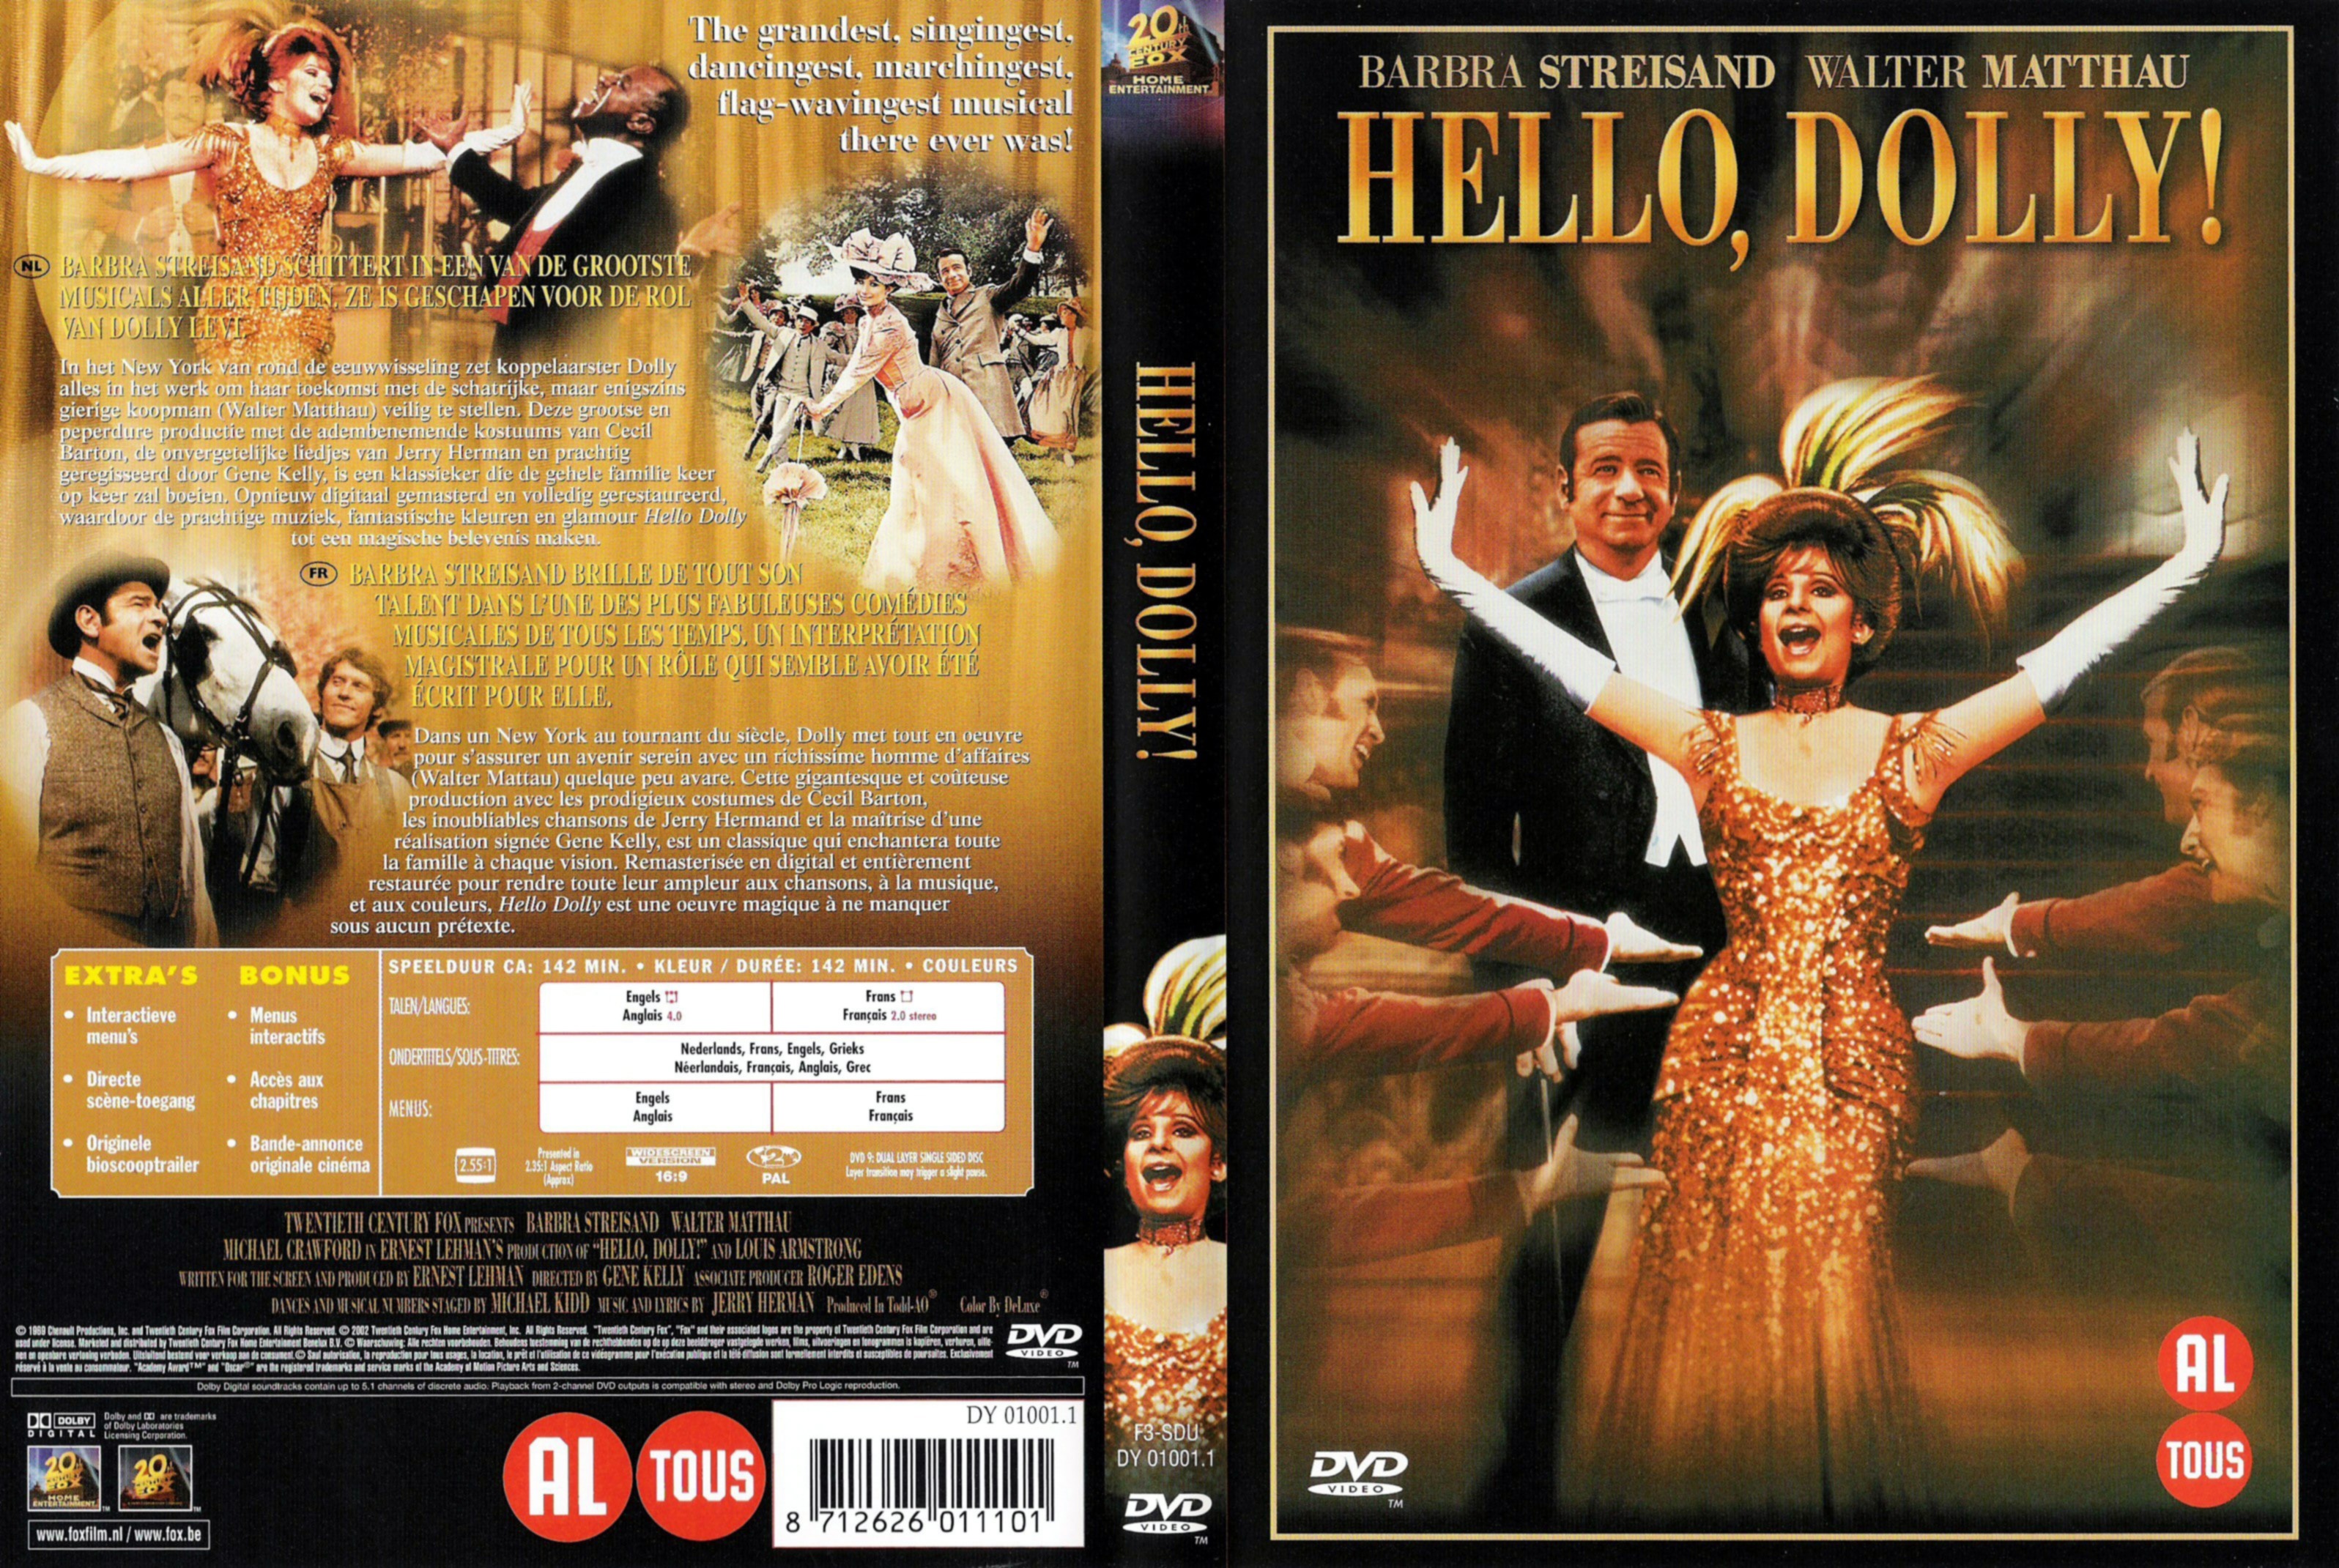 Jaquette DVD Hello Dolly